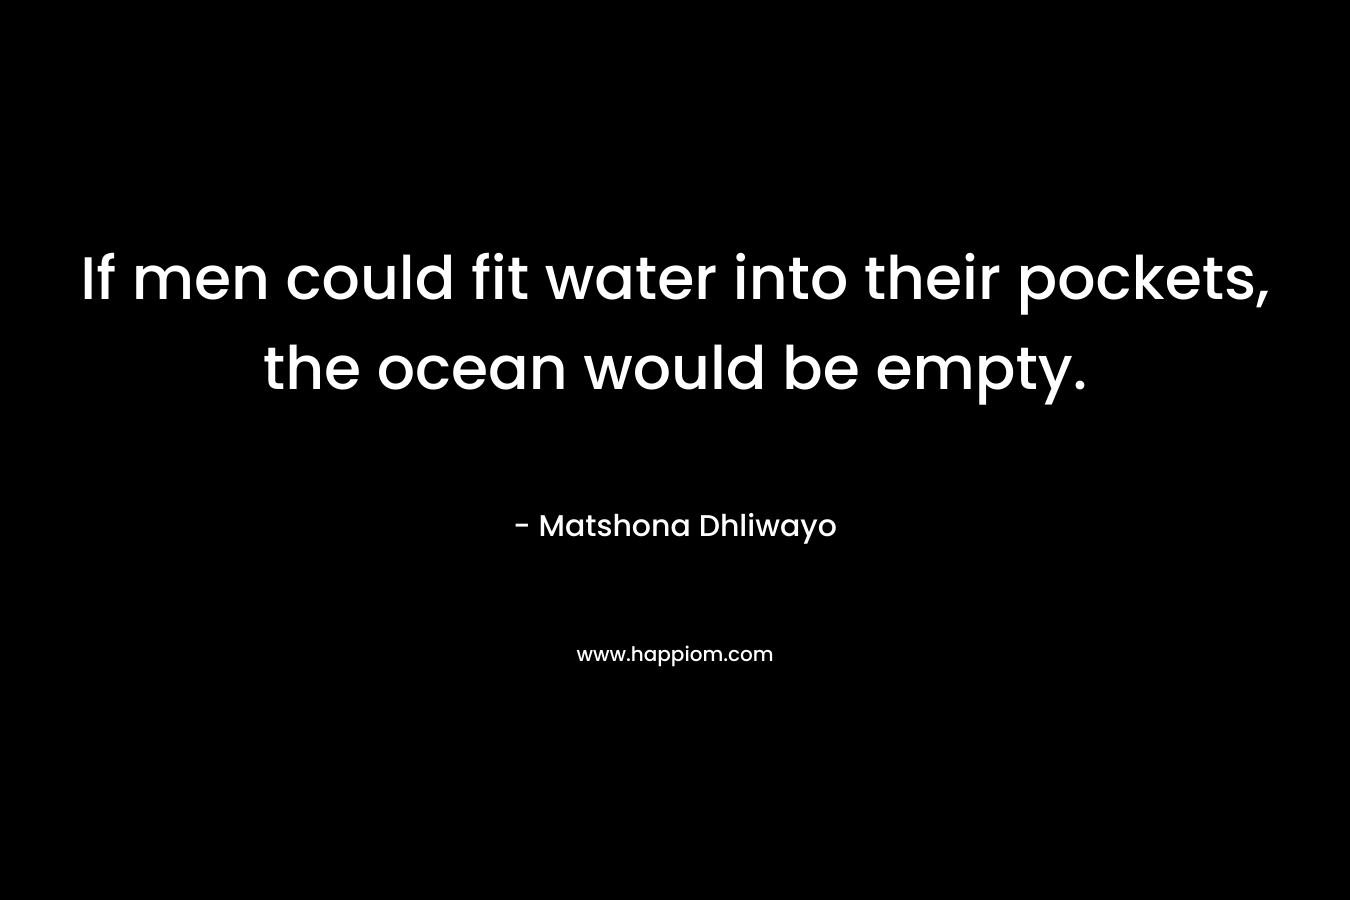 If men could fit water into their pockets, the ocean would be empty.